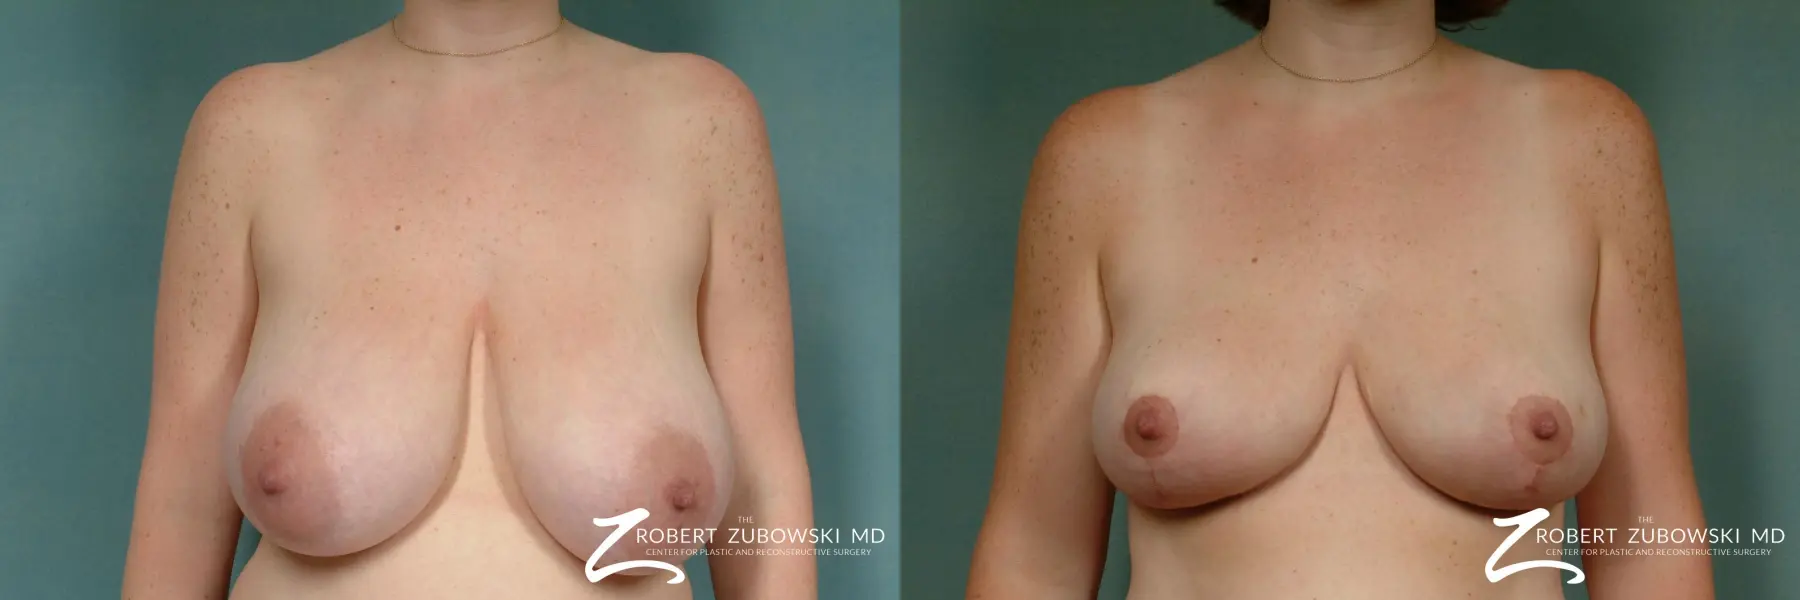 Breast Lift: Patient 1 - Before and After  